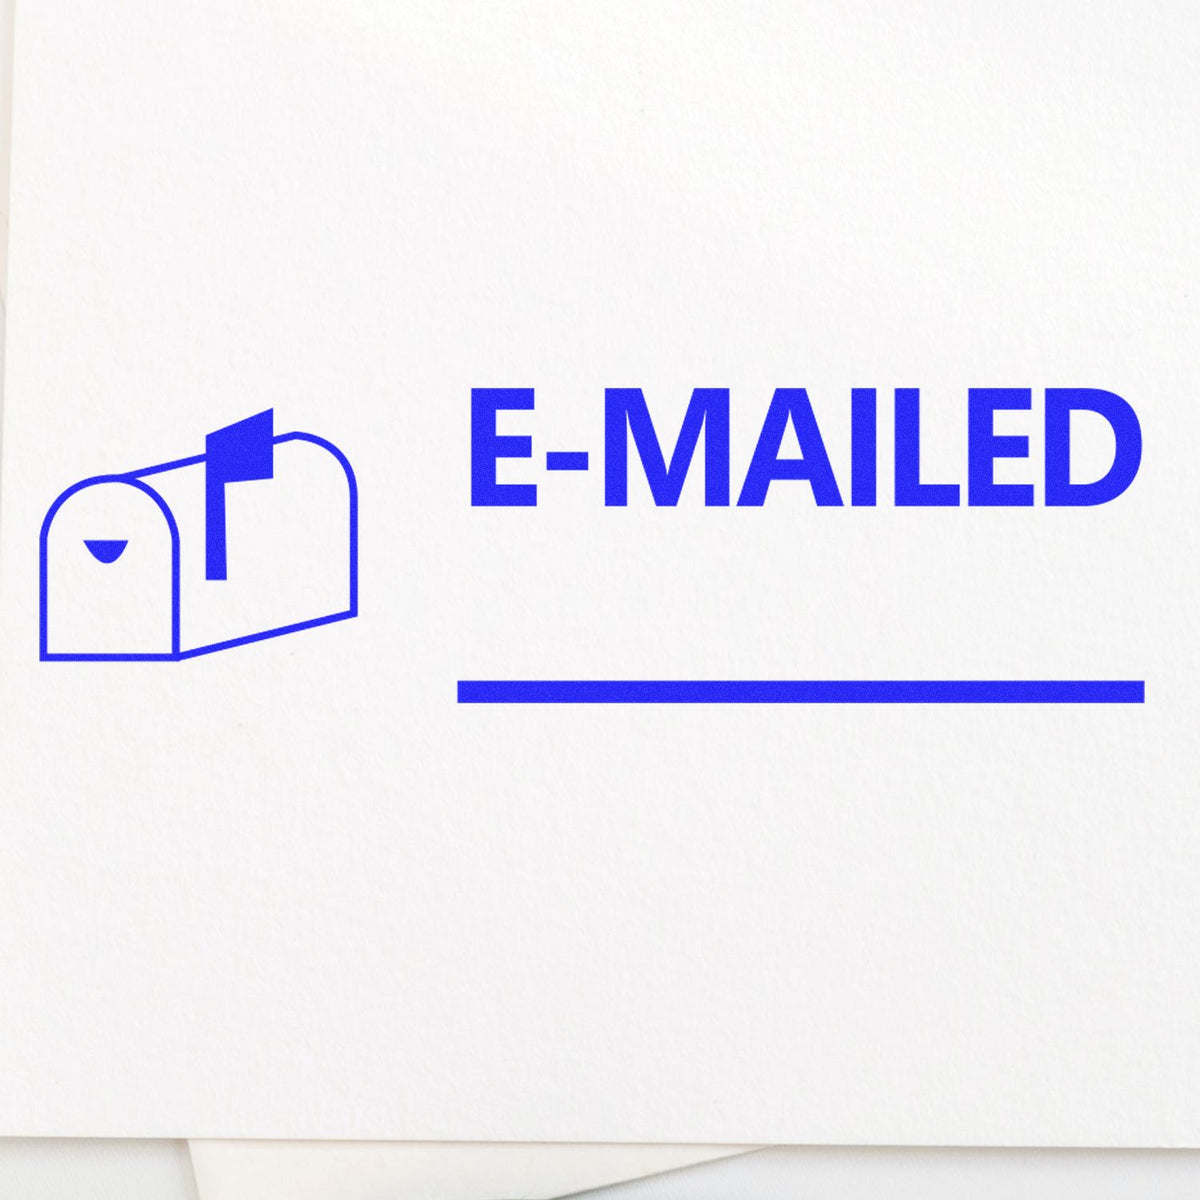 Emailed with Mailbox Rubber Stamp In Use Photo